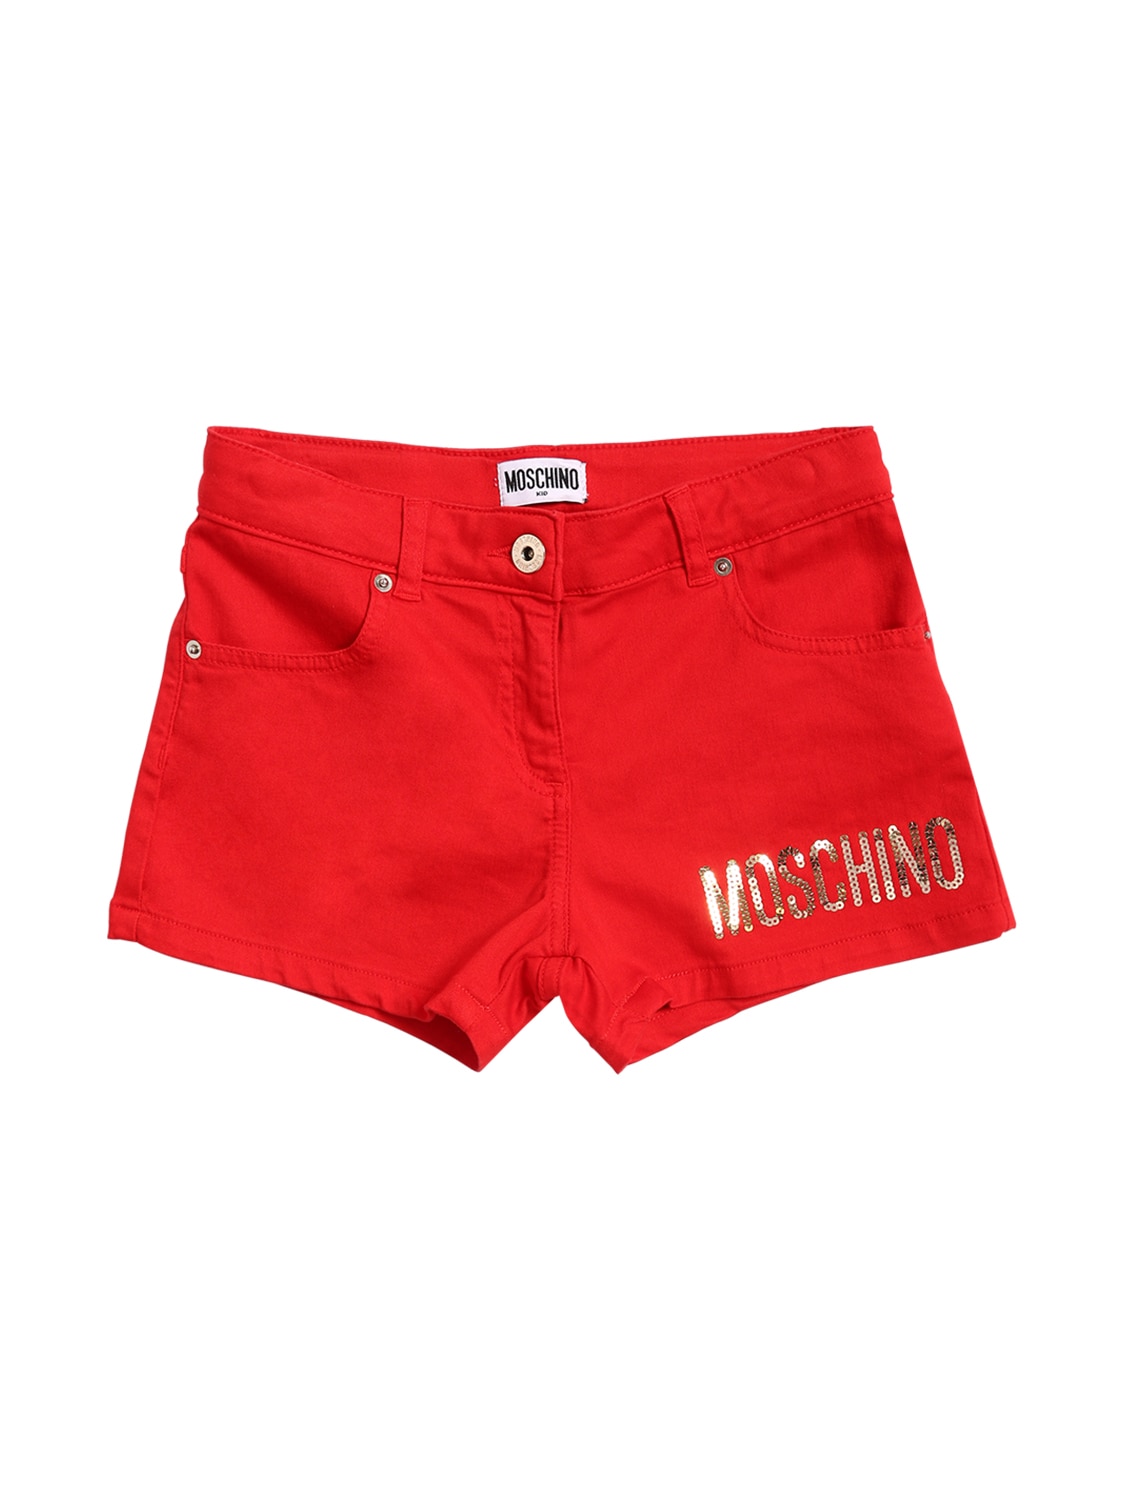 Moschino Kids' Sequined Stretch Cotton Denim Shorts In Red